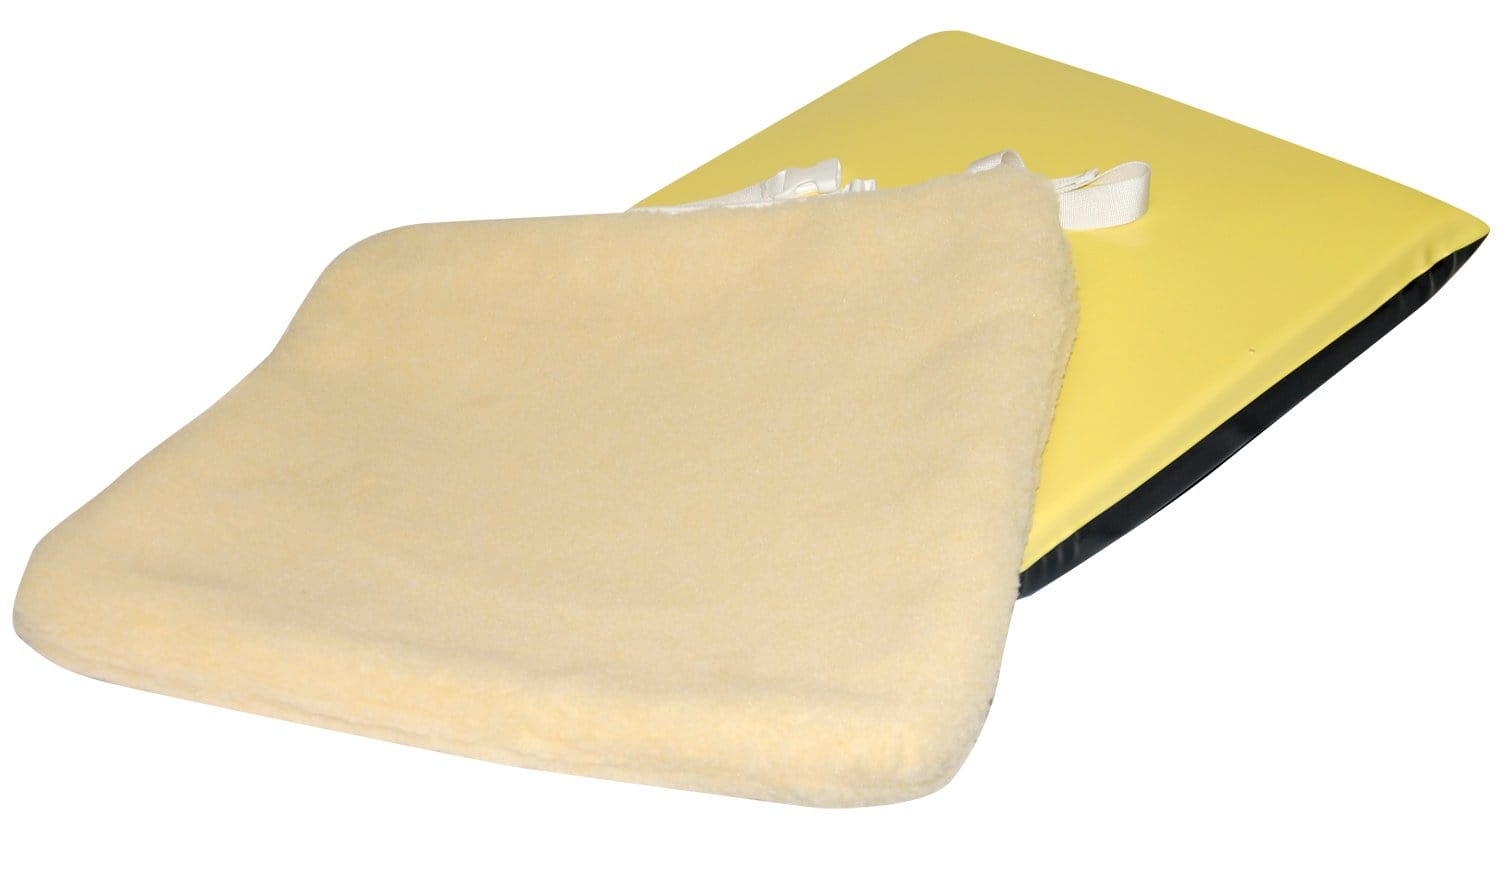 SkilCare Cushions SkilCare Econo-Gel 16" Cushion with Sheepskin Cover